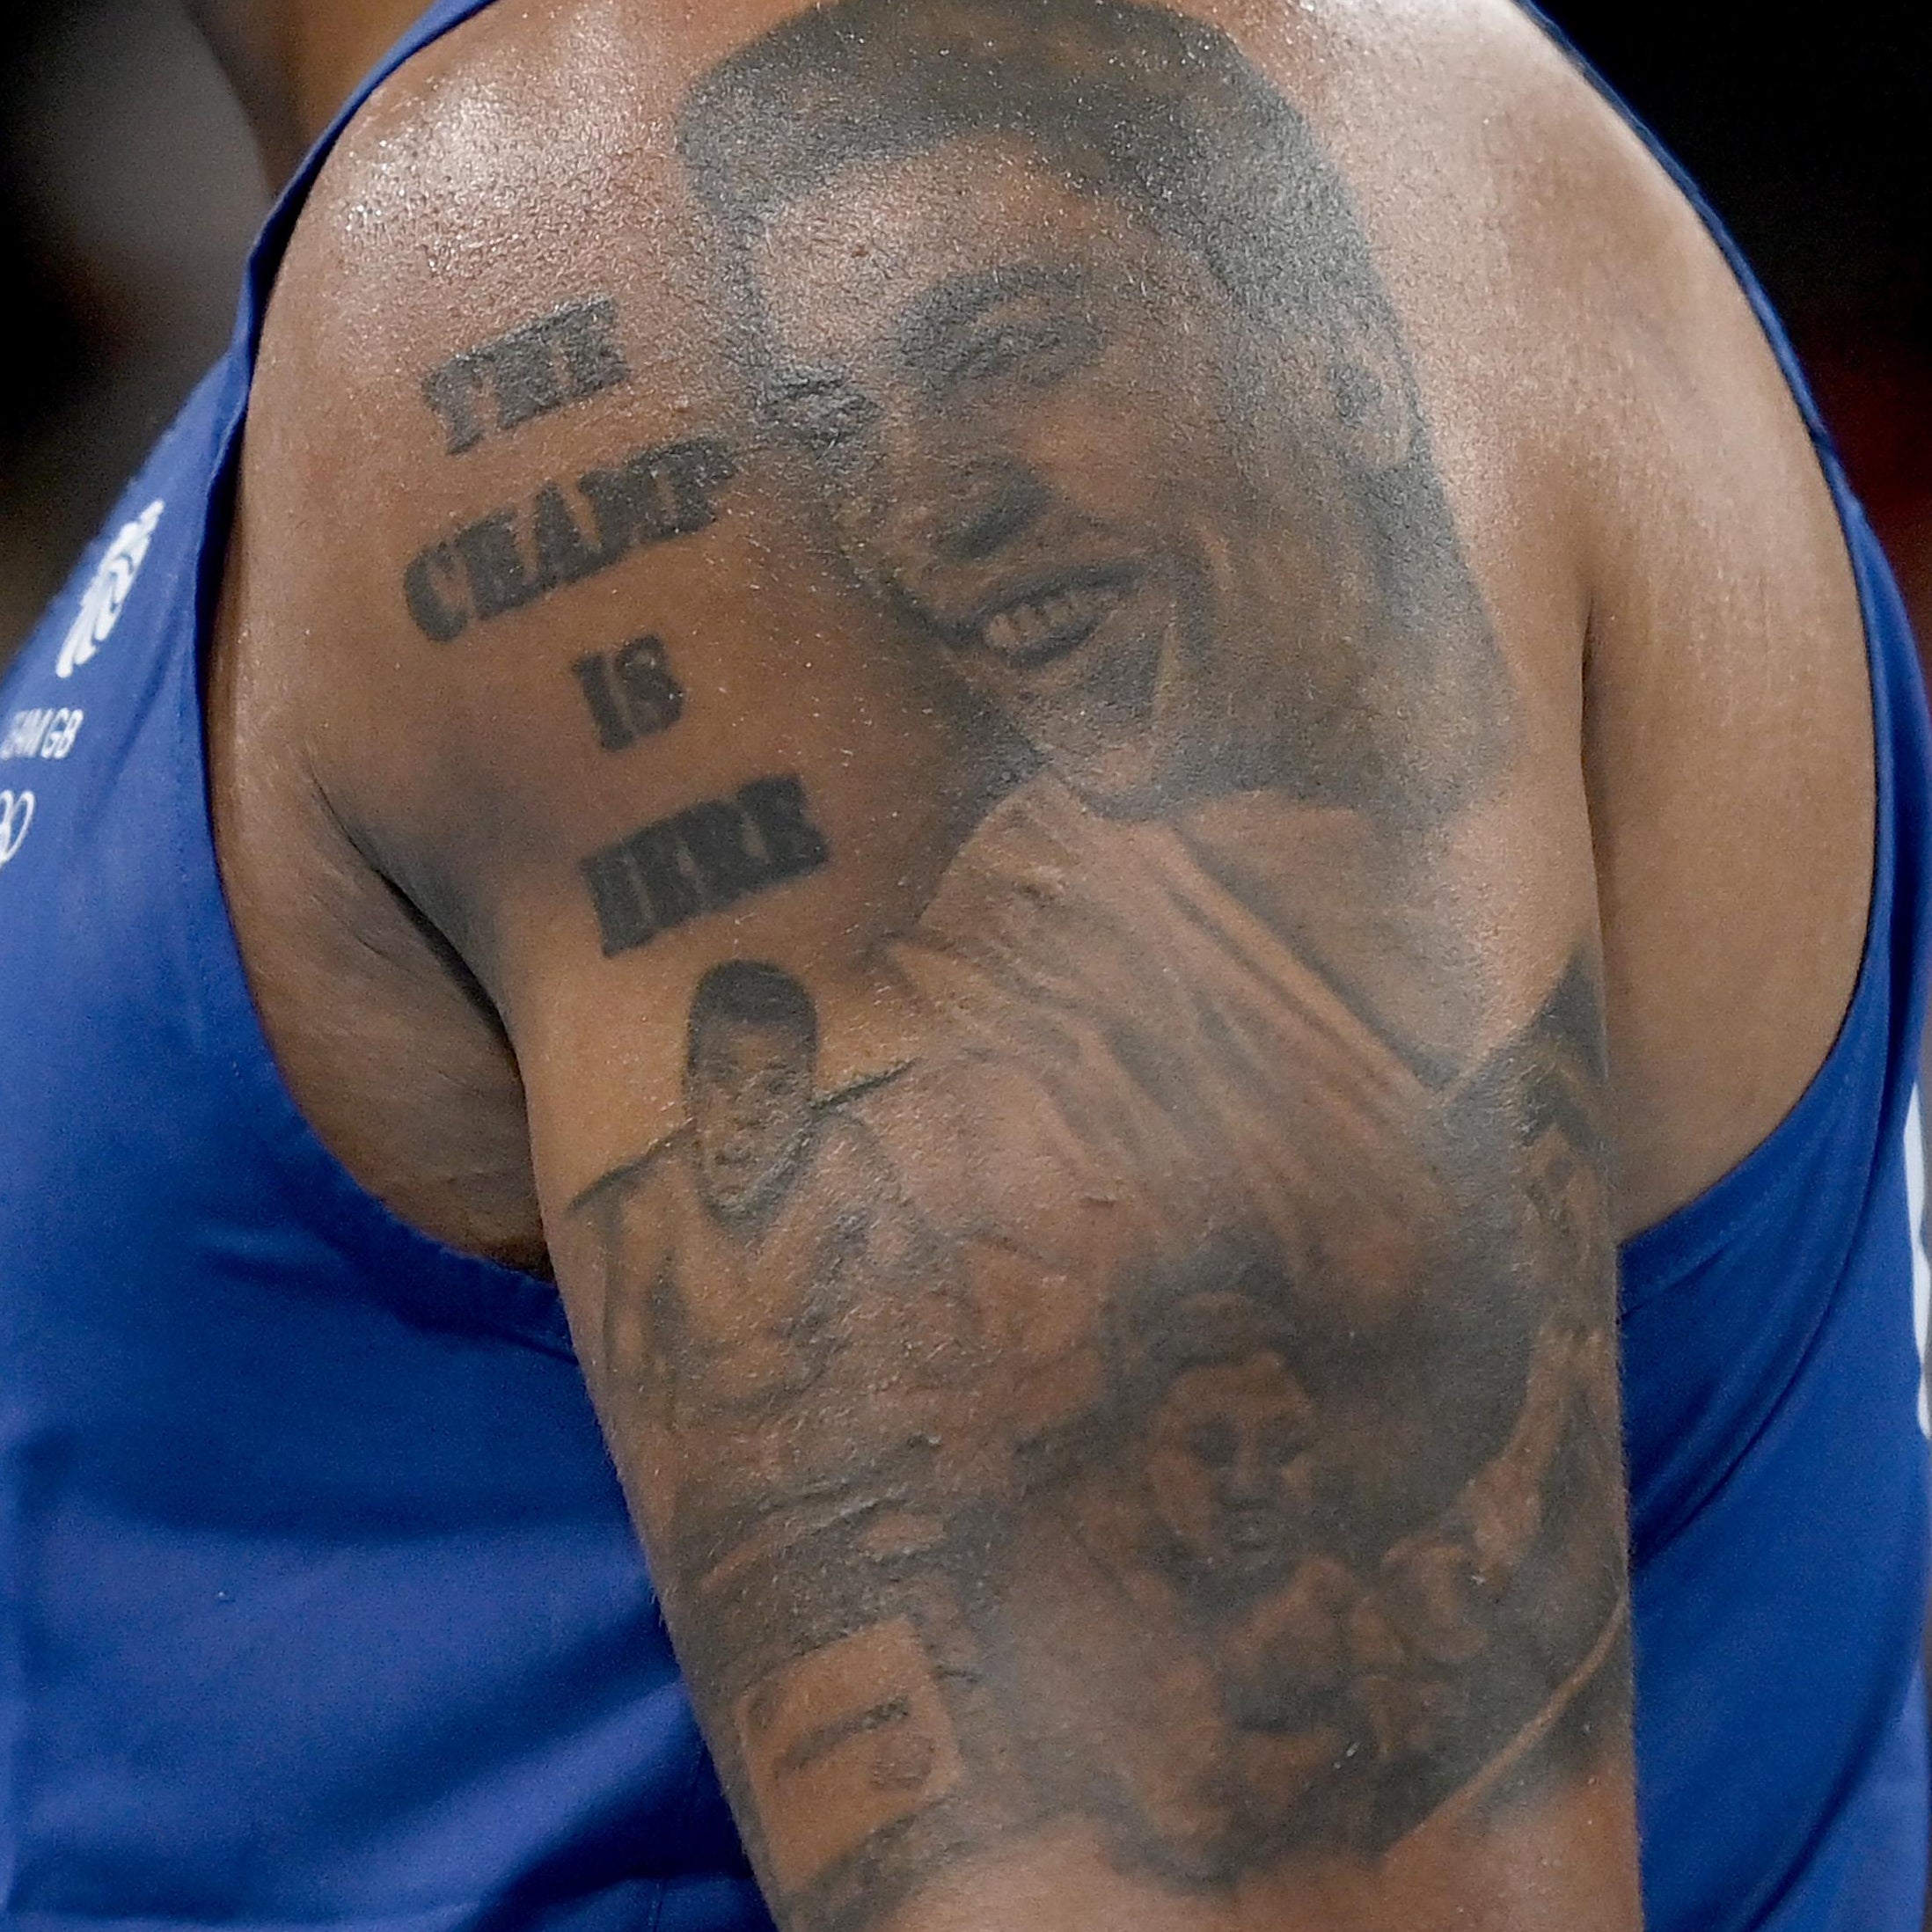 The tattoo on an arm showing three Muhammad Alis and reading "The Champ Is Here" at the top, torso in a singlet.